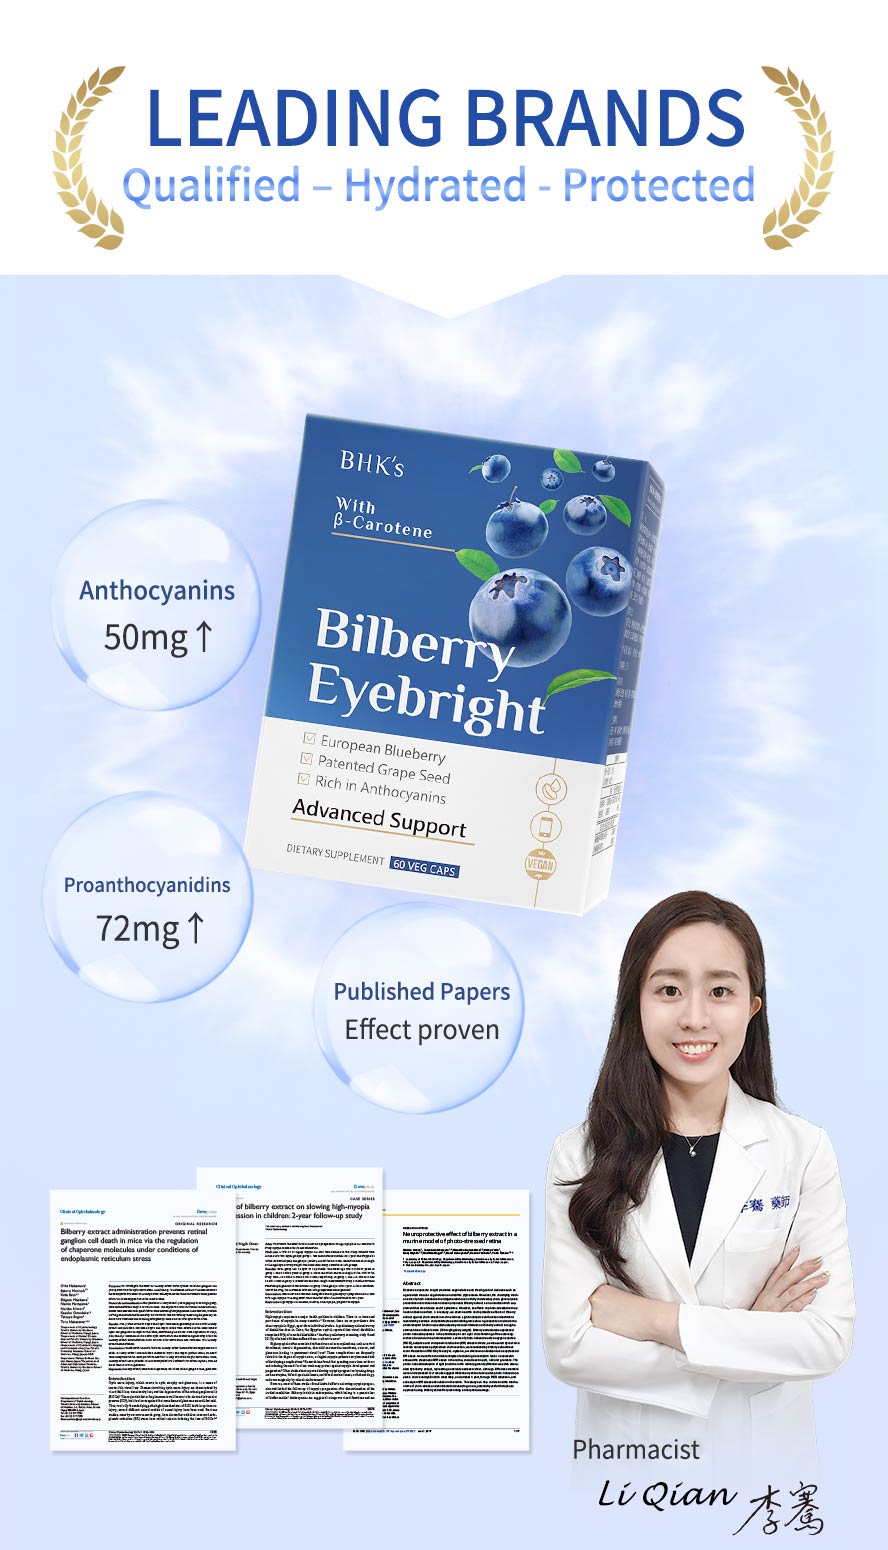 The pharmacist recommended that BHKs Bilberry Eyebright Veg Capsules is the leading brand in protecting the healthy eyes